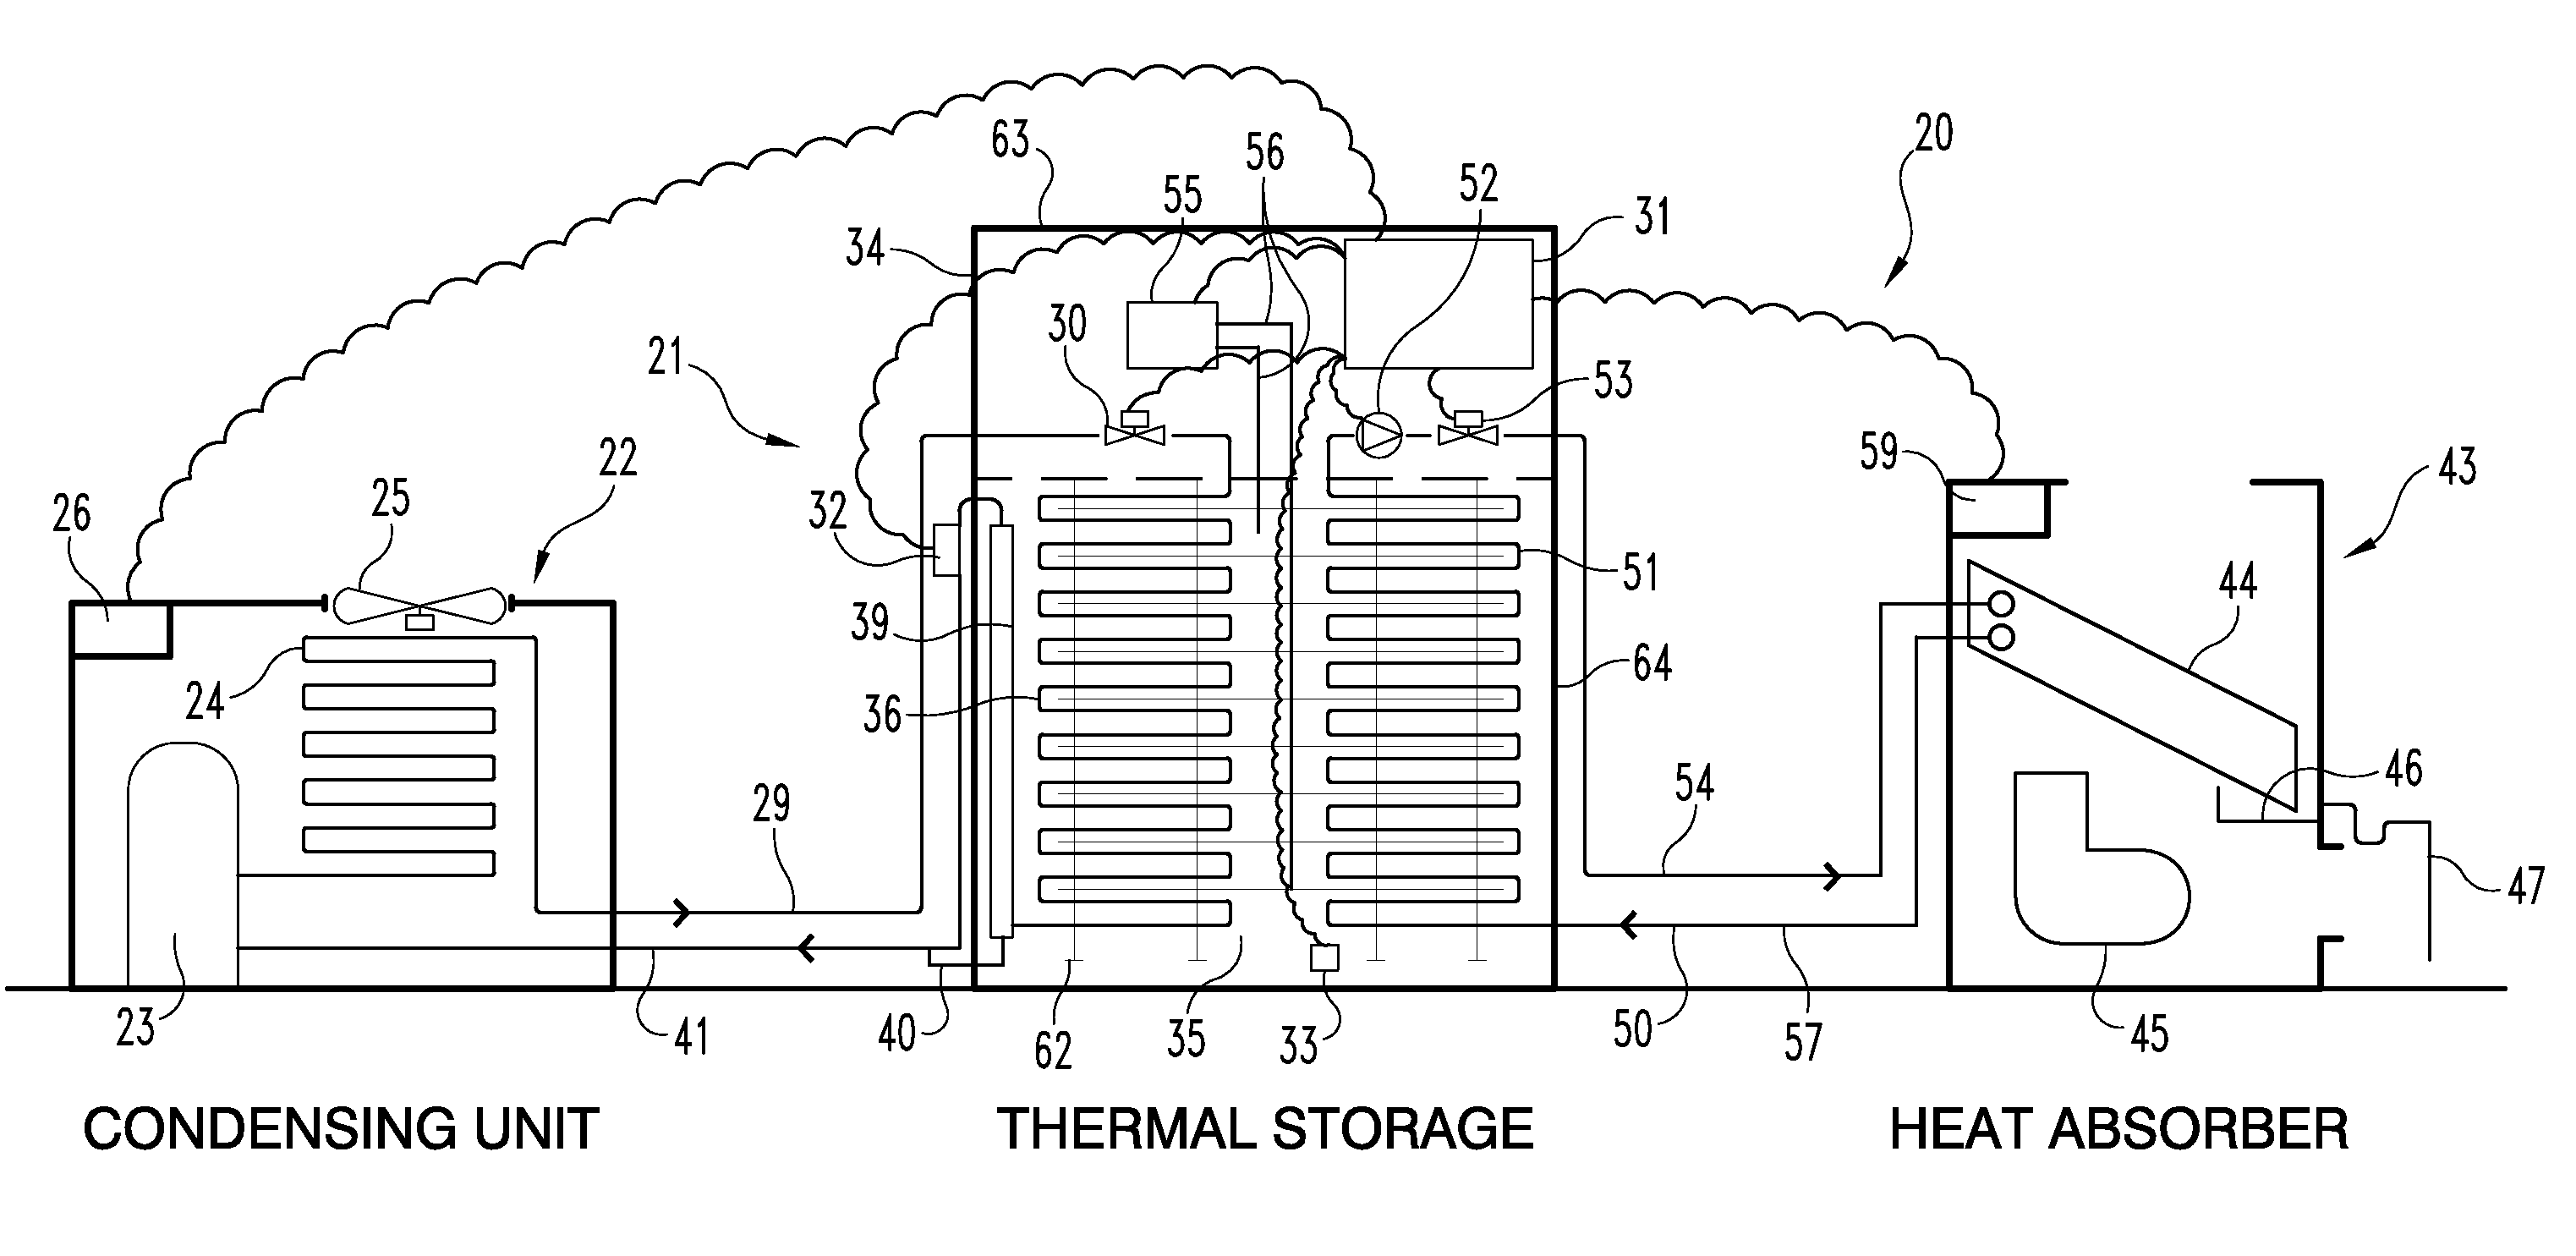 Thermal storage unit for air conditioning applications